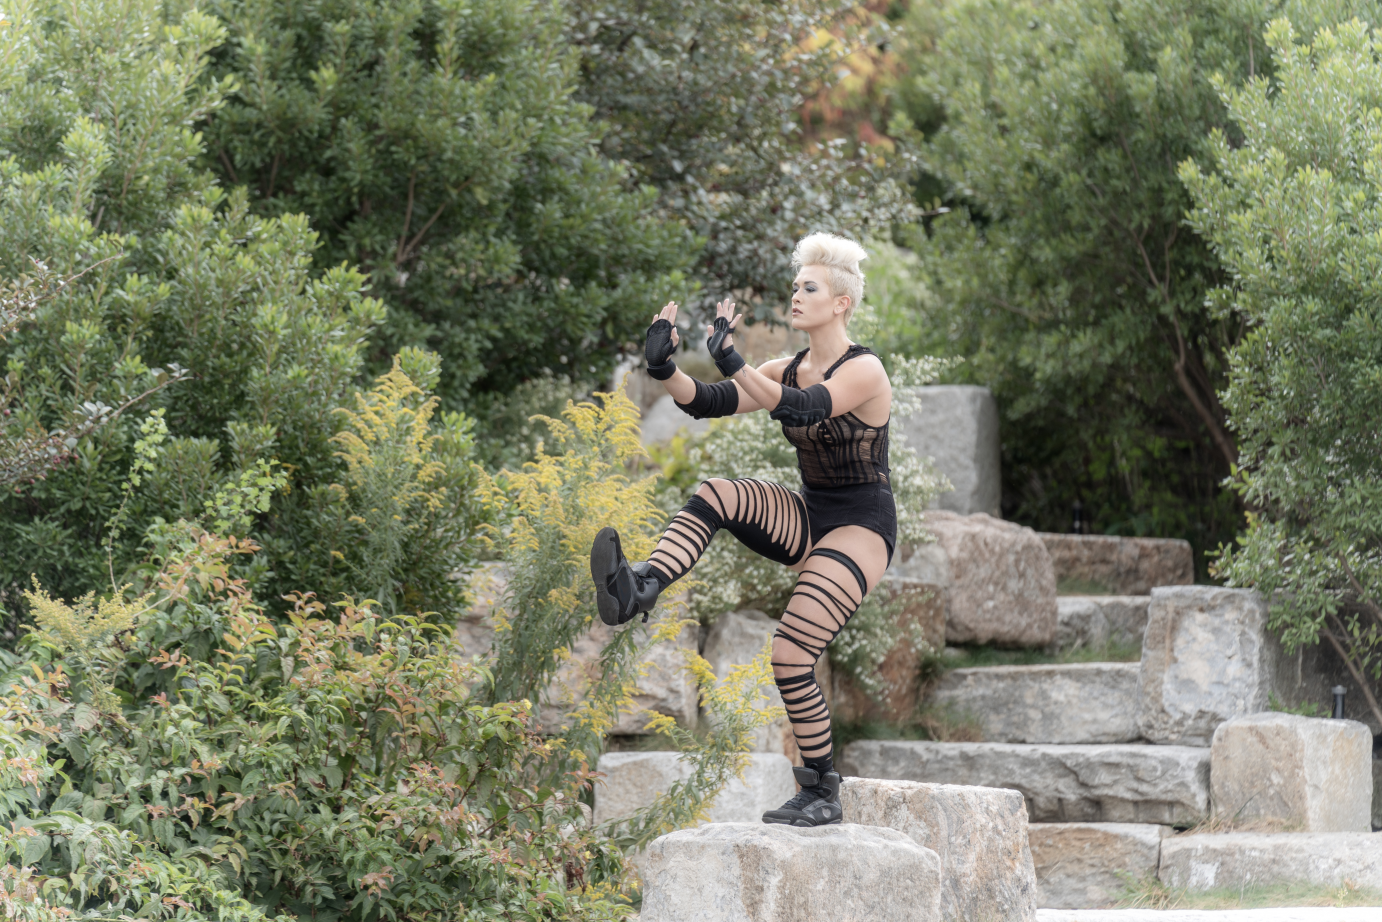 In ripped black tights and with a platinum blond punk hair, Robyn Cascio stands in profile on a slab of rocks.She has one leg bent and lifted. Both elbows are bent at right angles. 